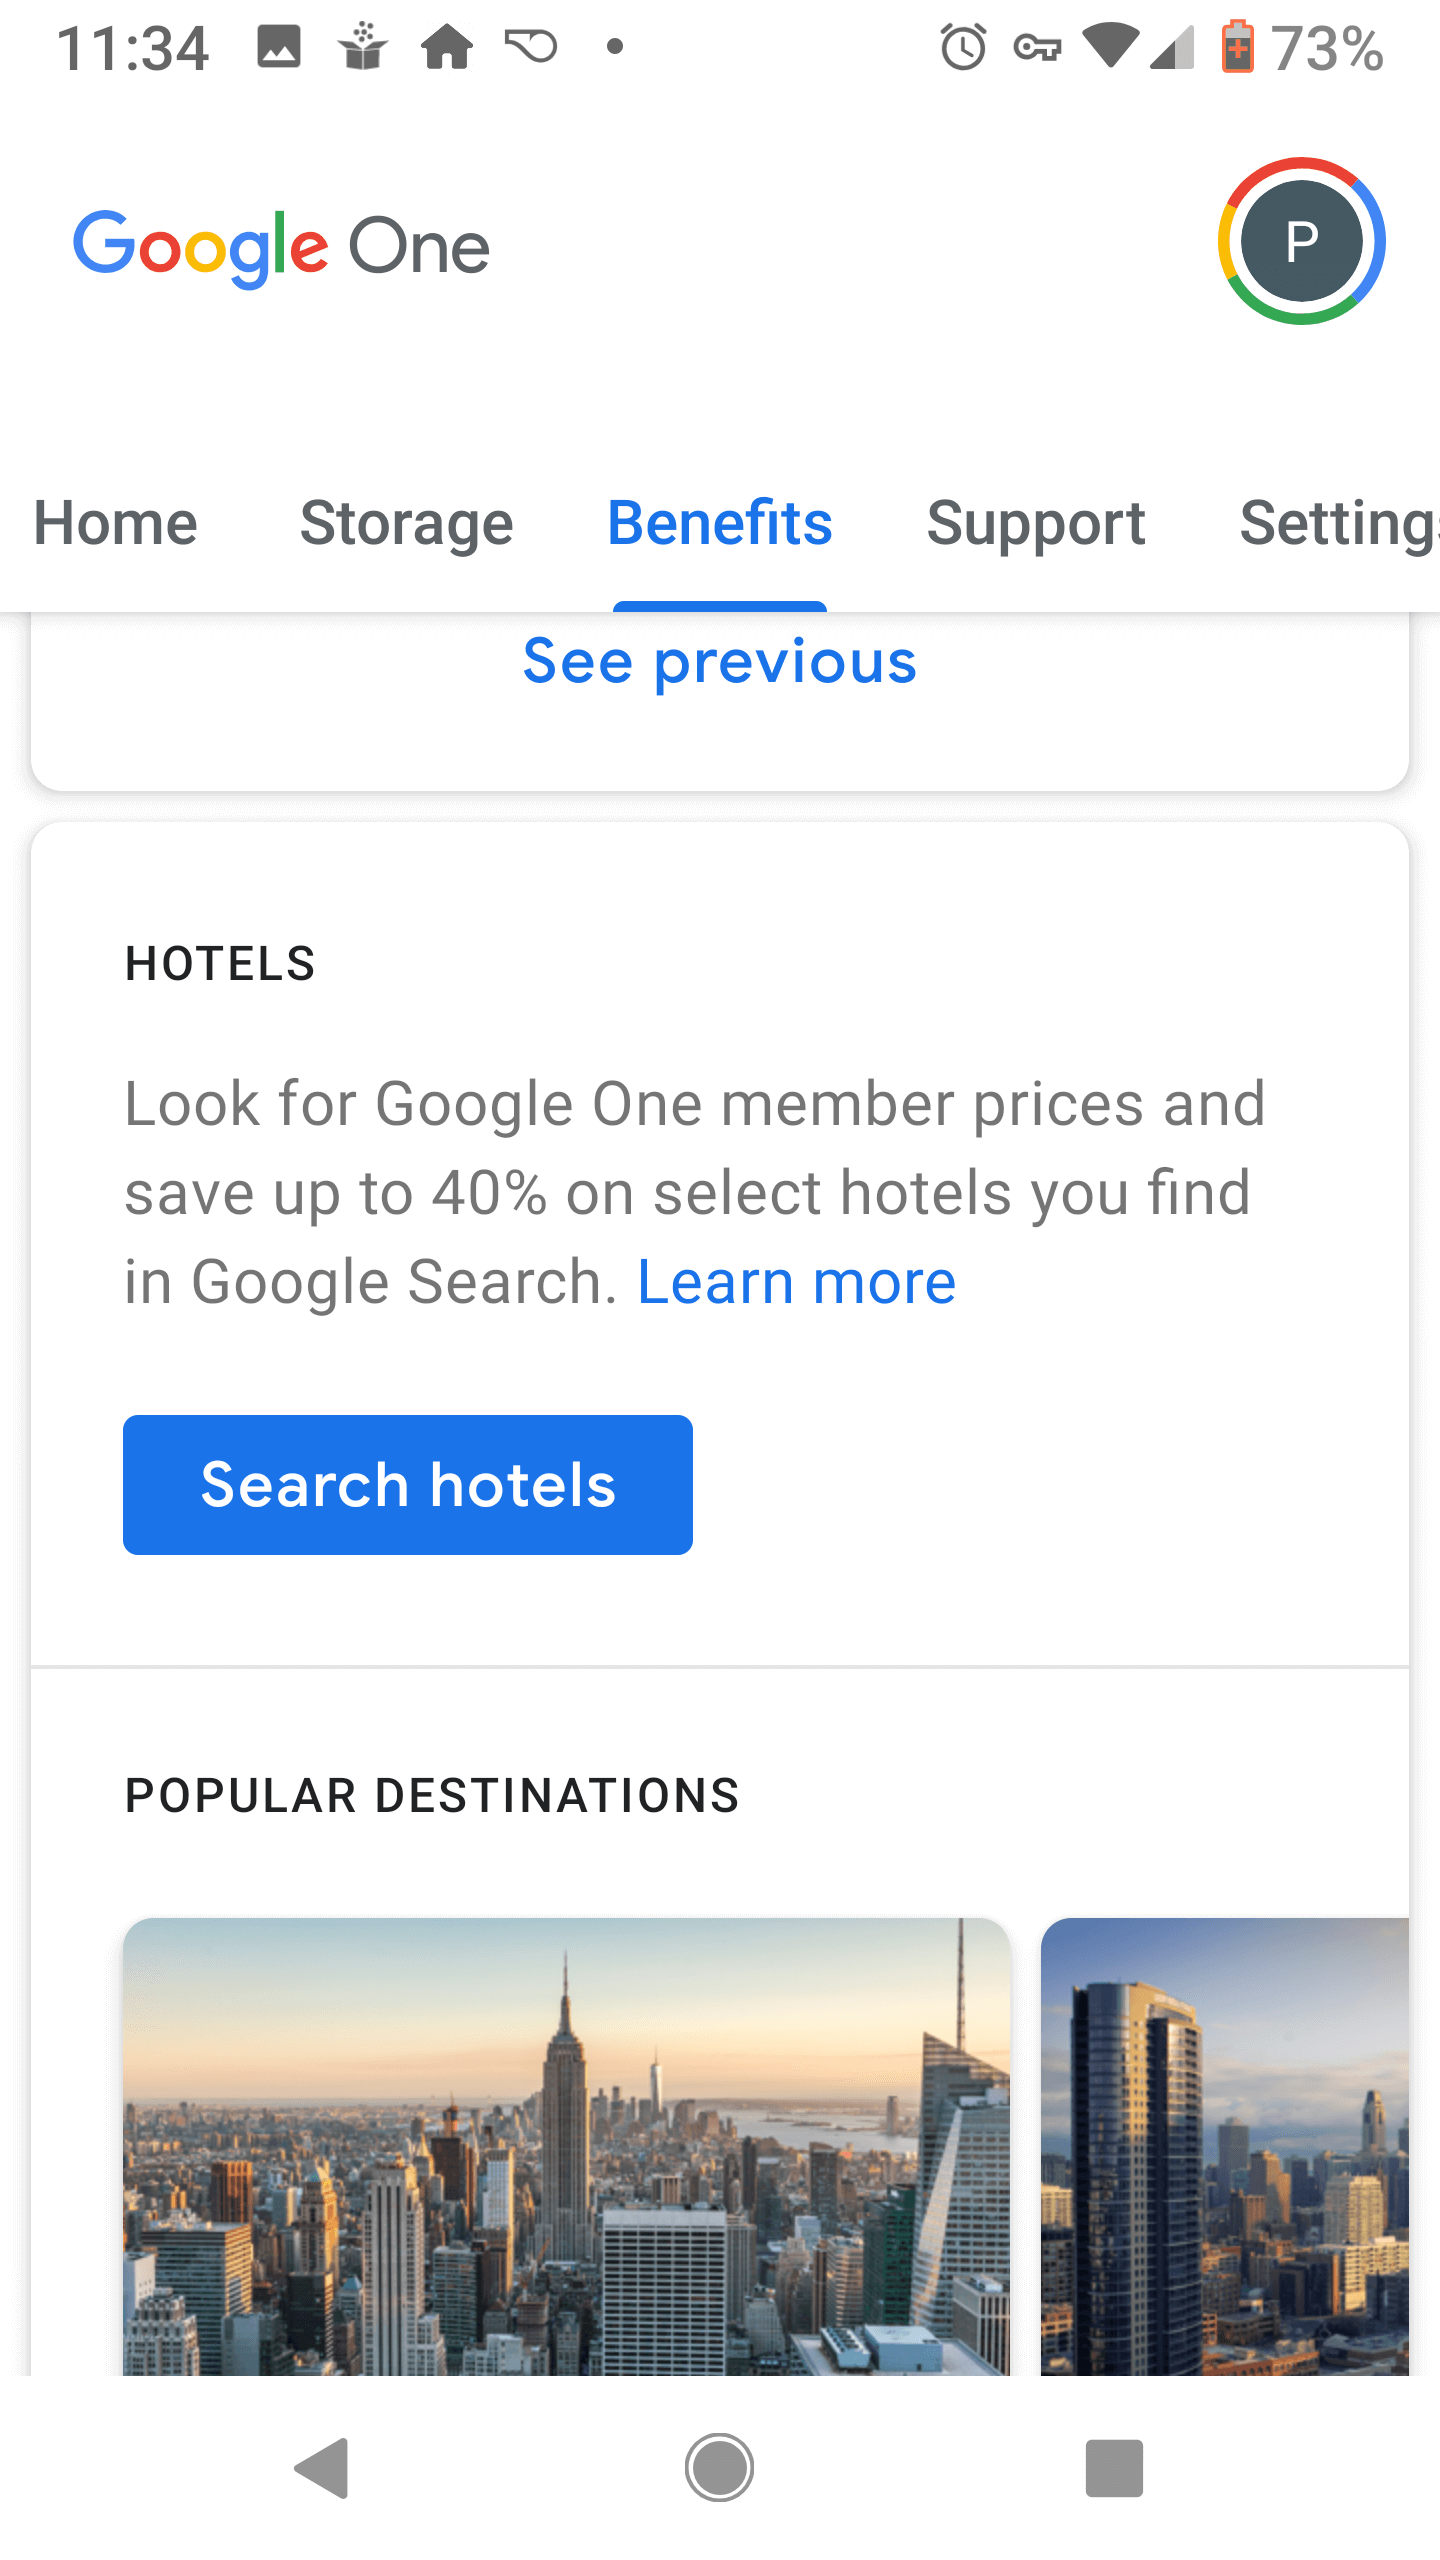 Google Drive's rebrand to Google One includes offers for hotels found in Search ...